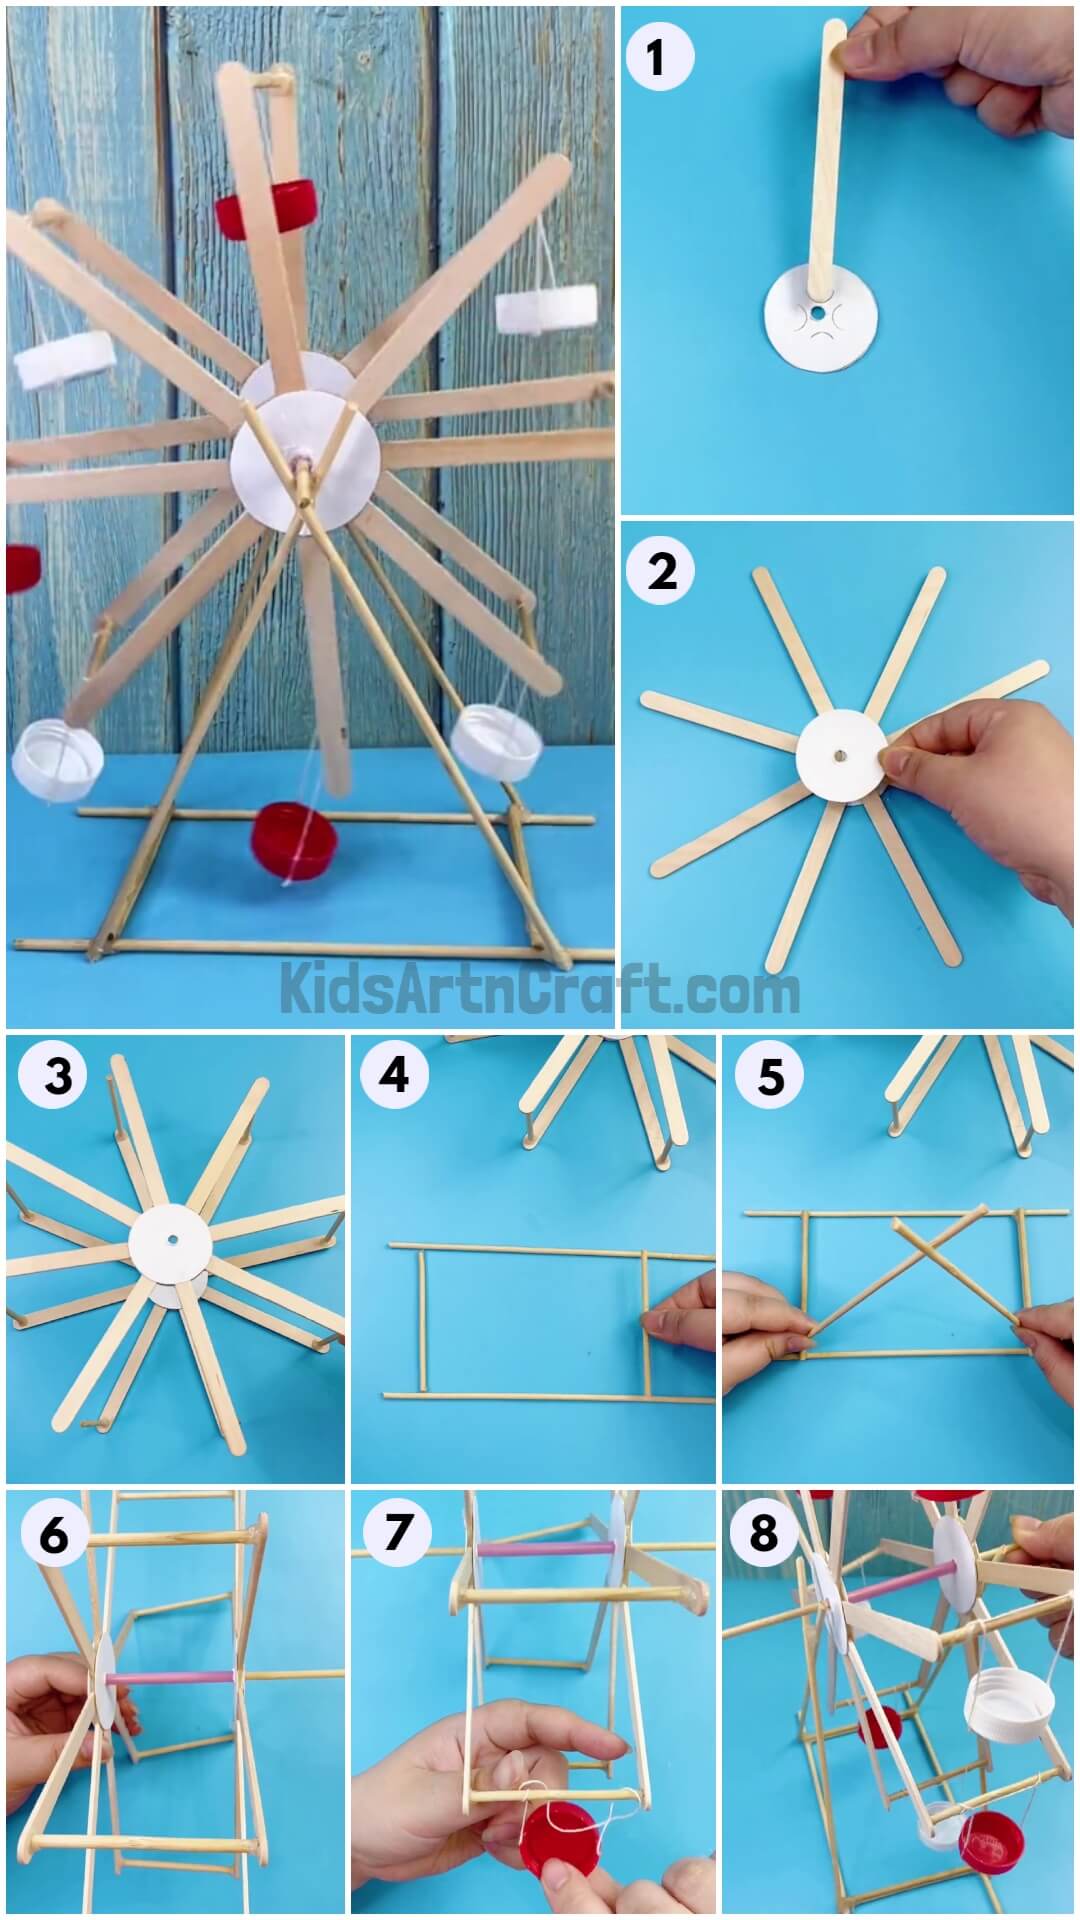  DIY Recycled Sticks And Bottle Caps Ferris Wheel Craft Idea For Kids